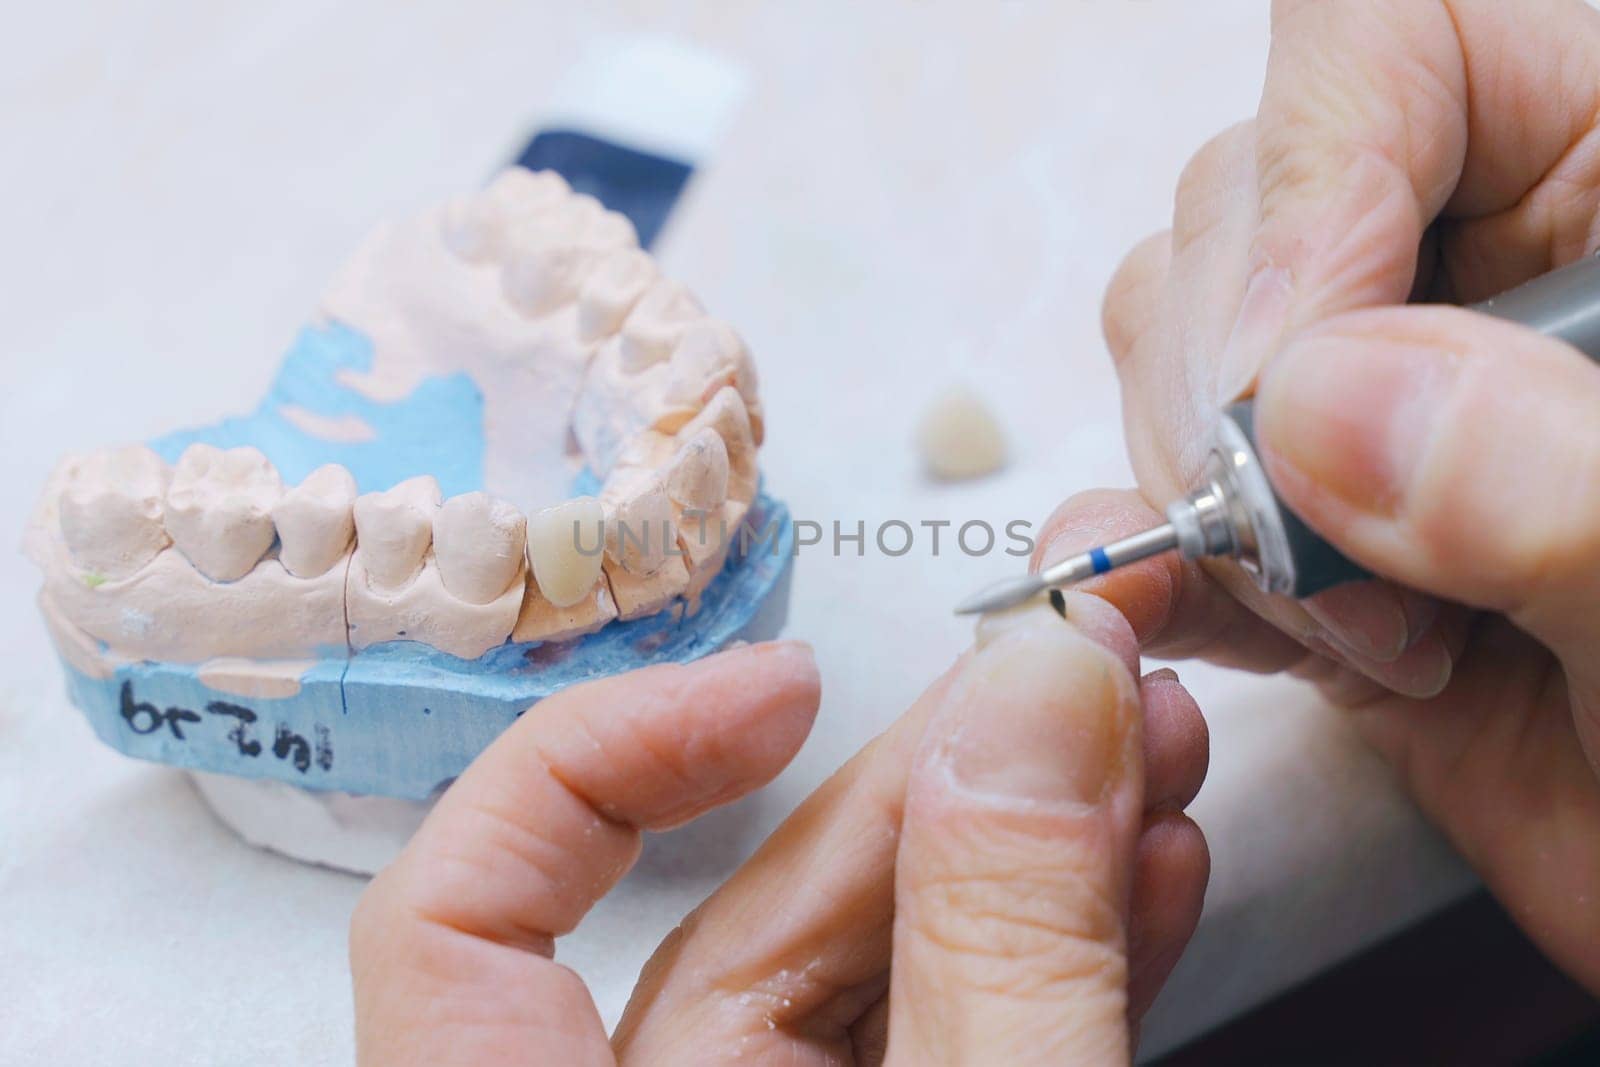 A dental technician cuts and cleans dentures with a milling cutter in a dental laboratory. Close-up